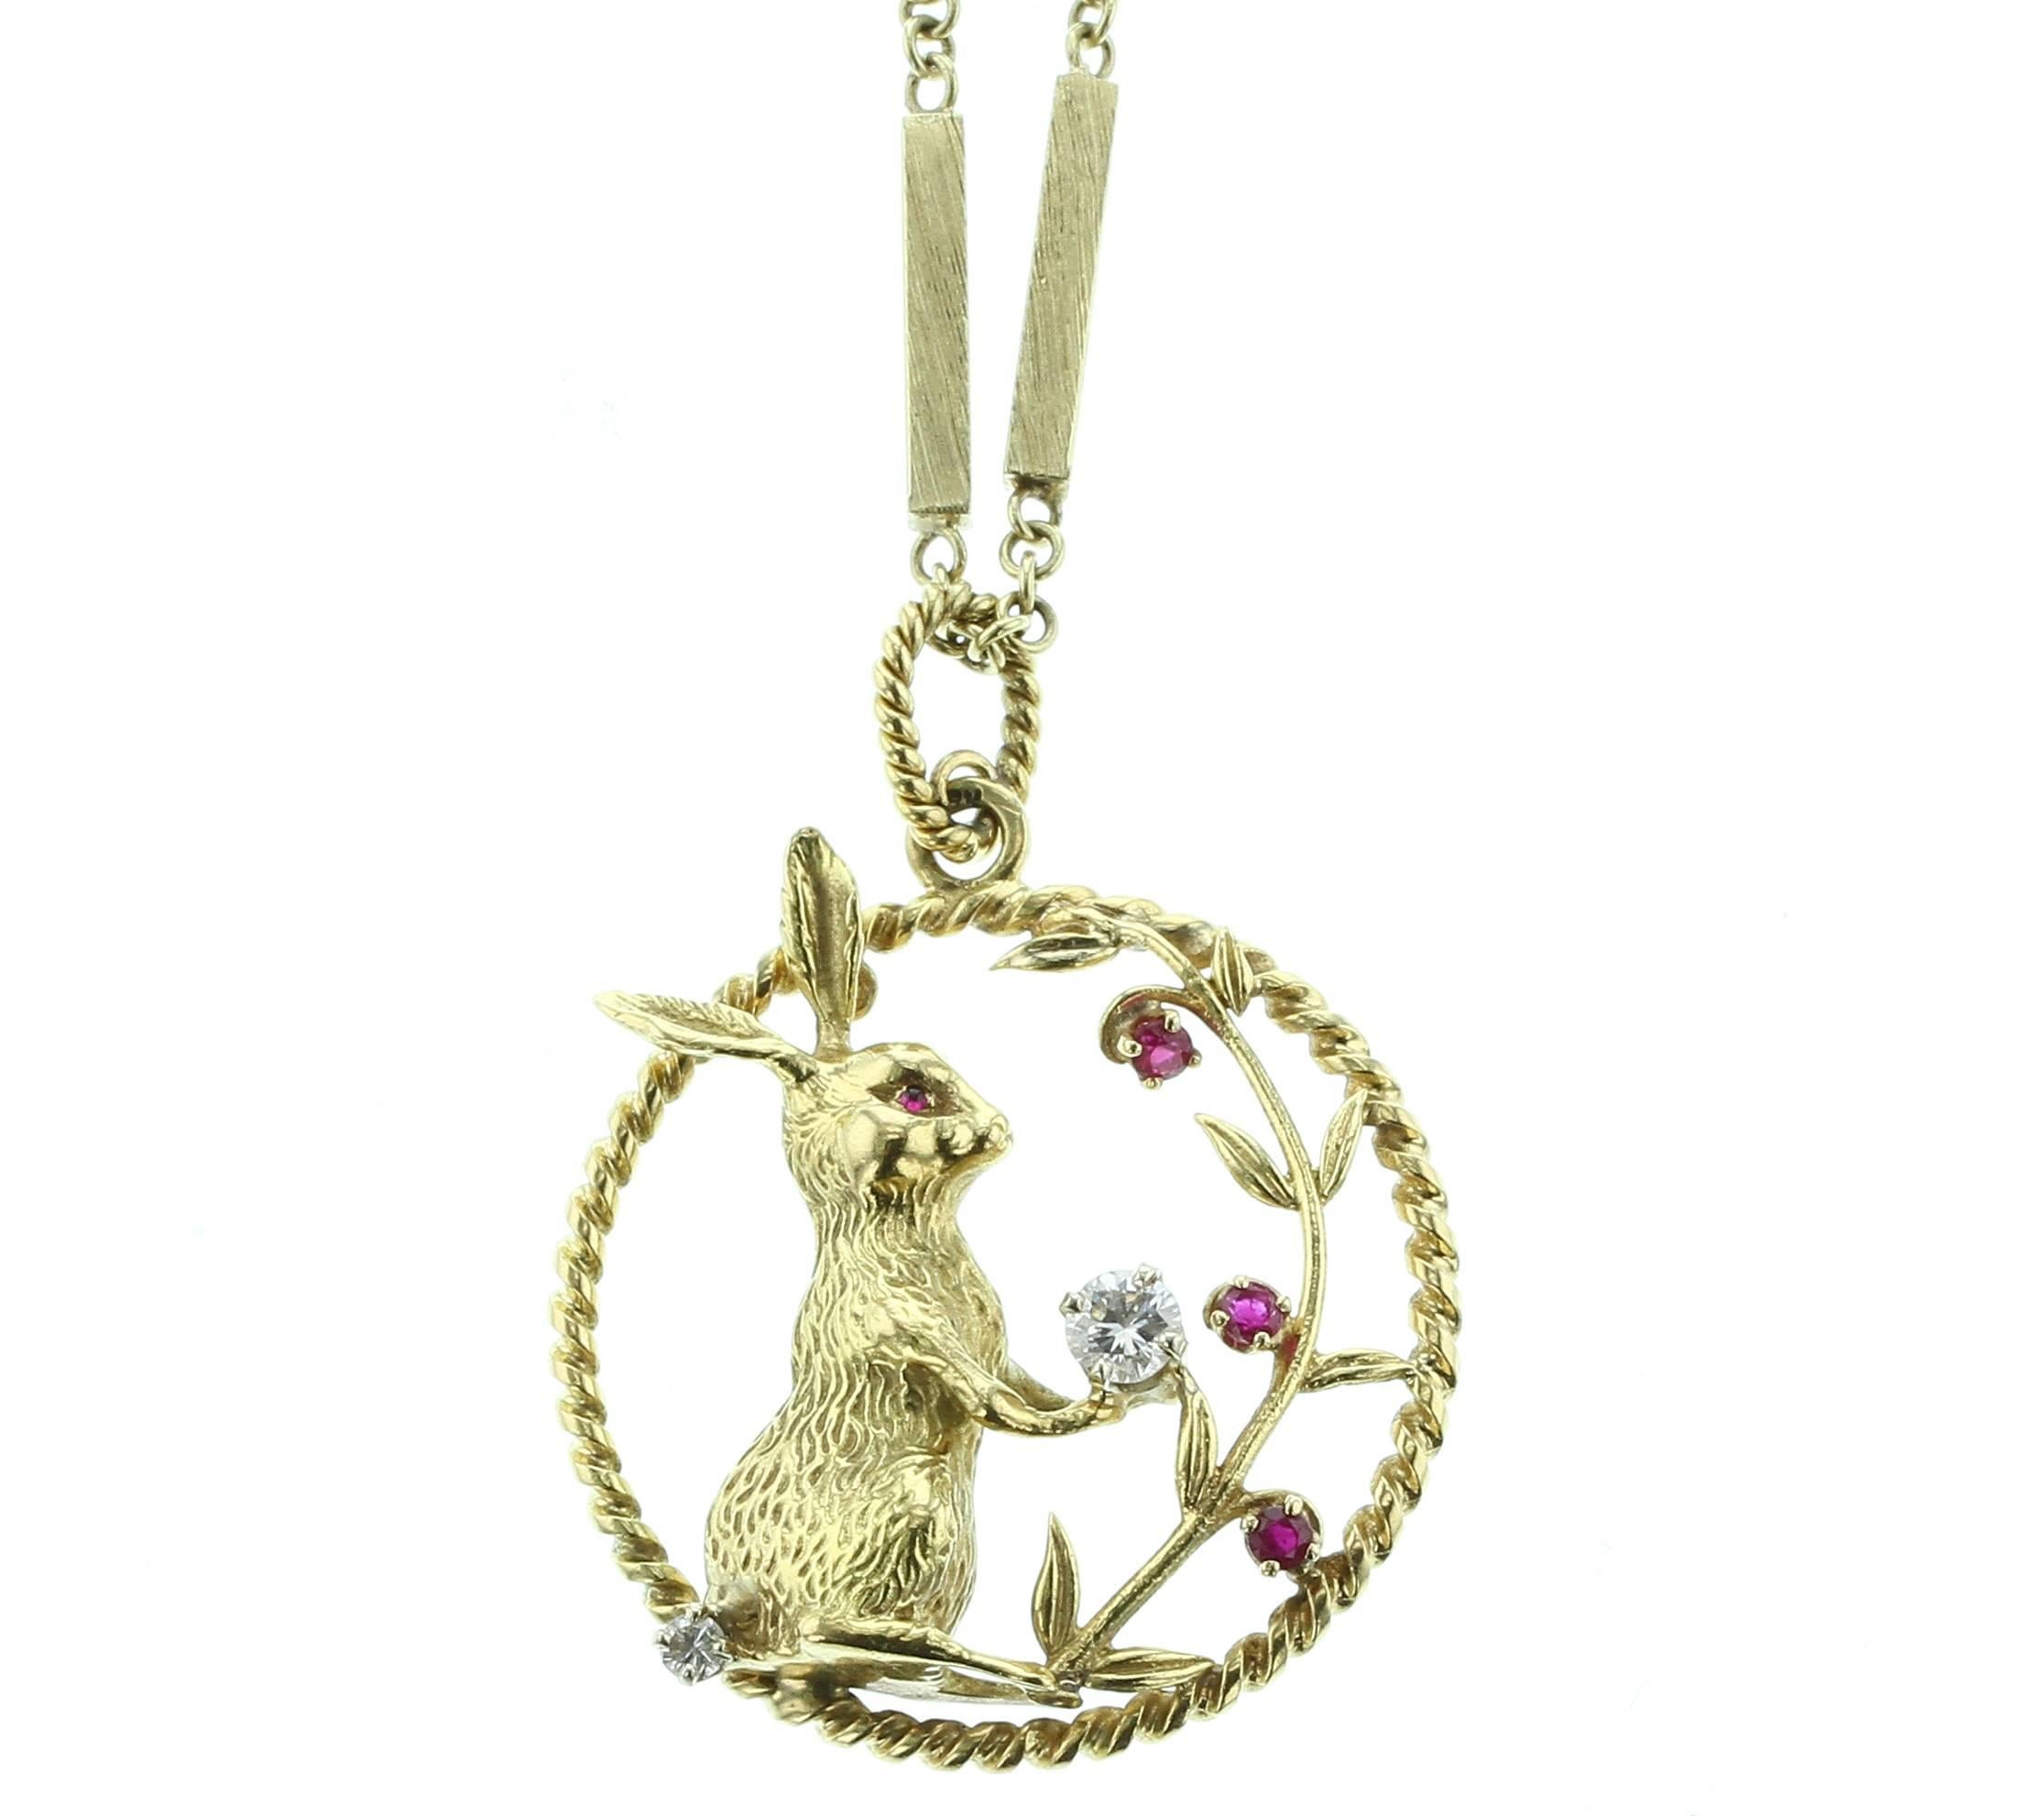 A beautiful pendant with a ruby-eyed bunny holding a diamond (appx 0.40 cts) and a diamond tail (appx. 0.10 cts) with three rubies on the leaves, in 18K Yellow Gold. Chain measures 36